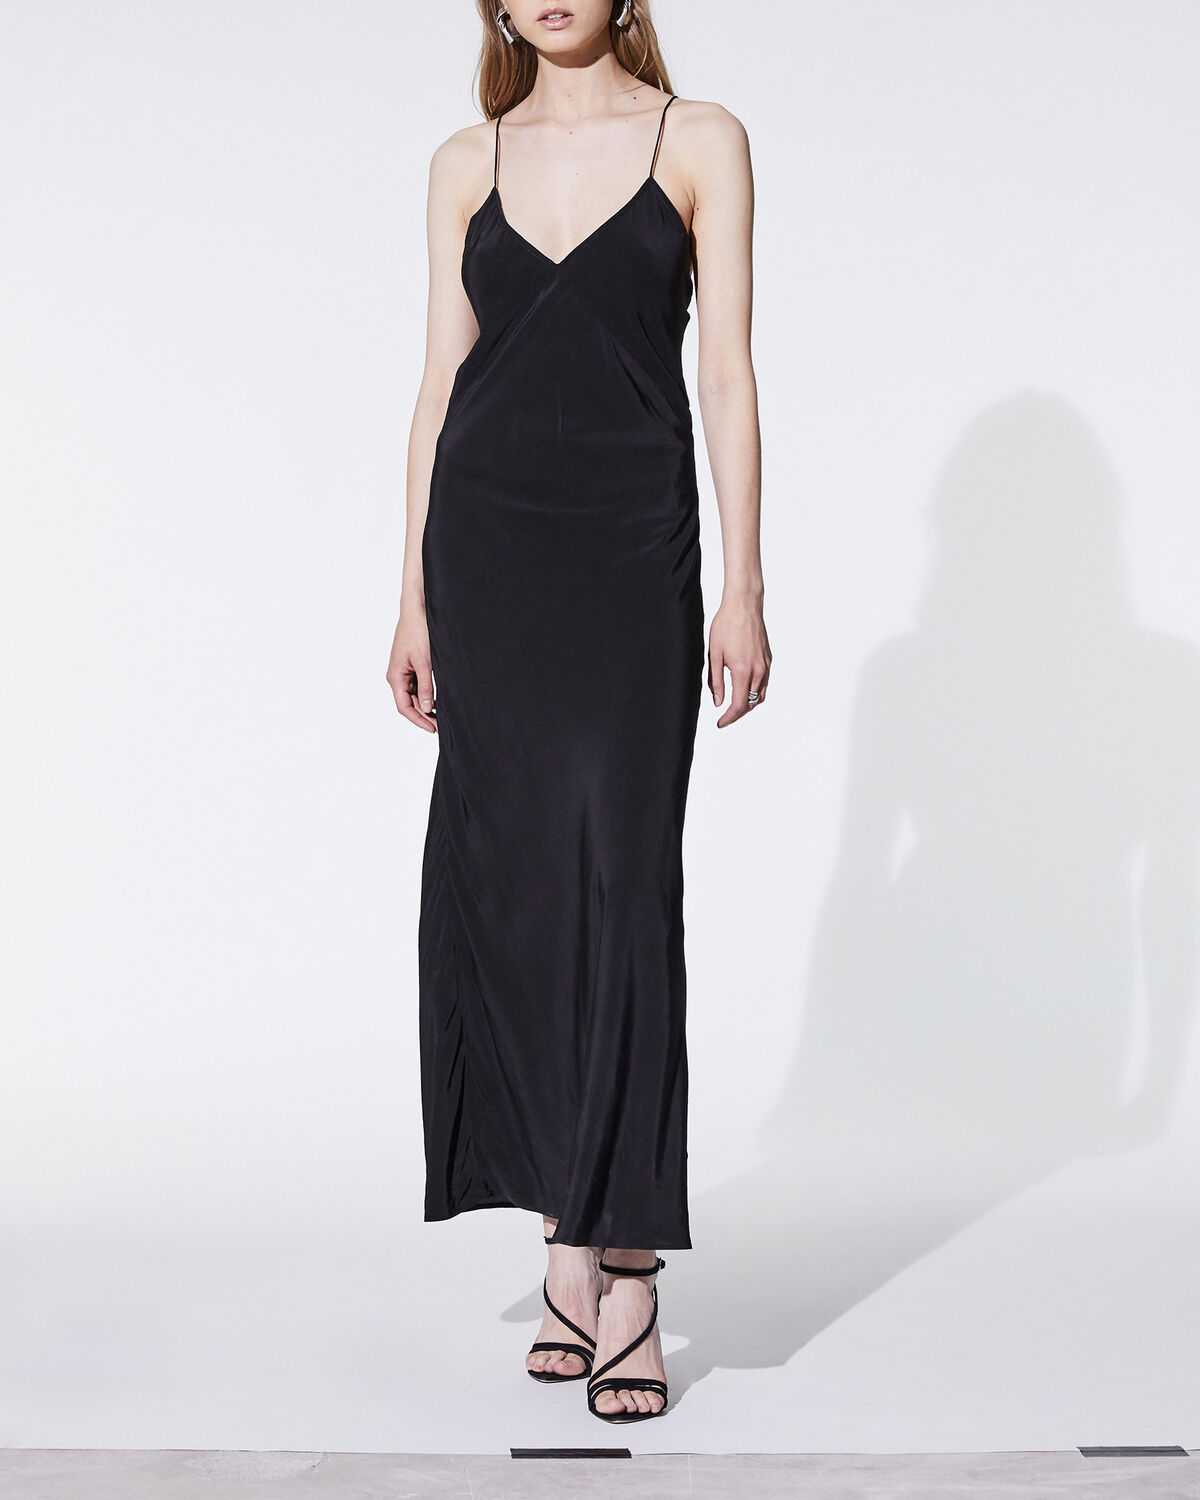 Photo of IRO Paris Phyn Dress Black - Definitely Feminine, This Long Dress Will Sublimate Your Silhouette. To Wear Close To The Body, It Is Distinguished By Its Thin Straps. Wear It With A Pair Of Pumps For A Glamorous Look. Dresses